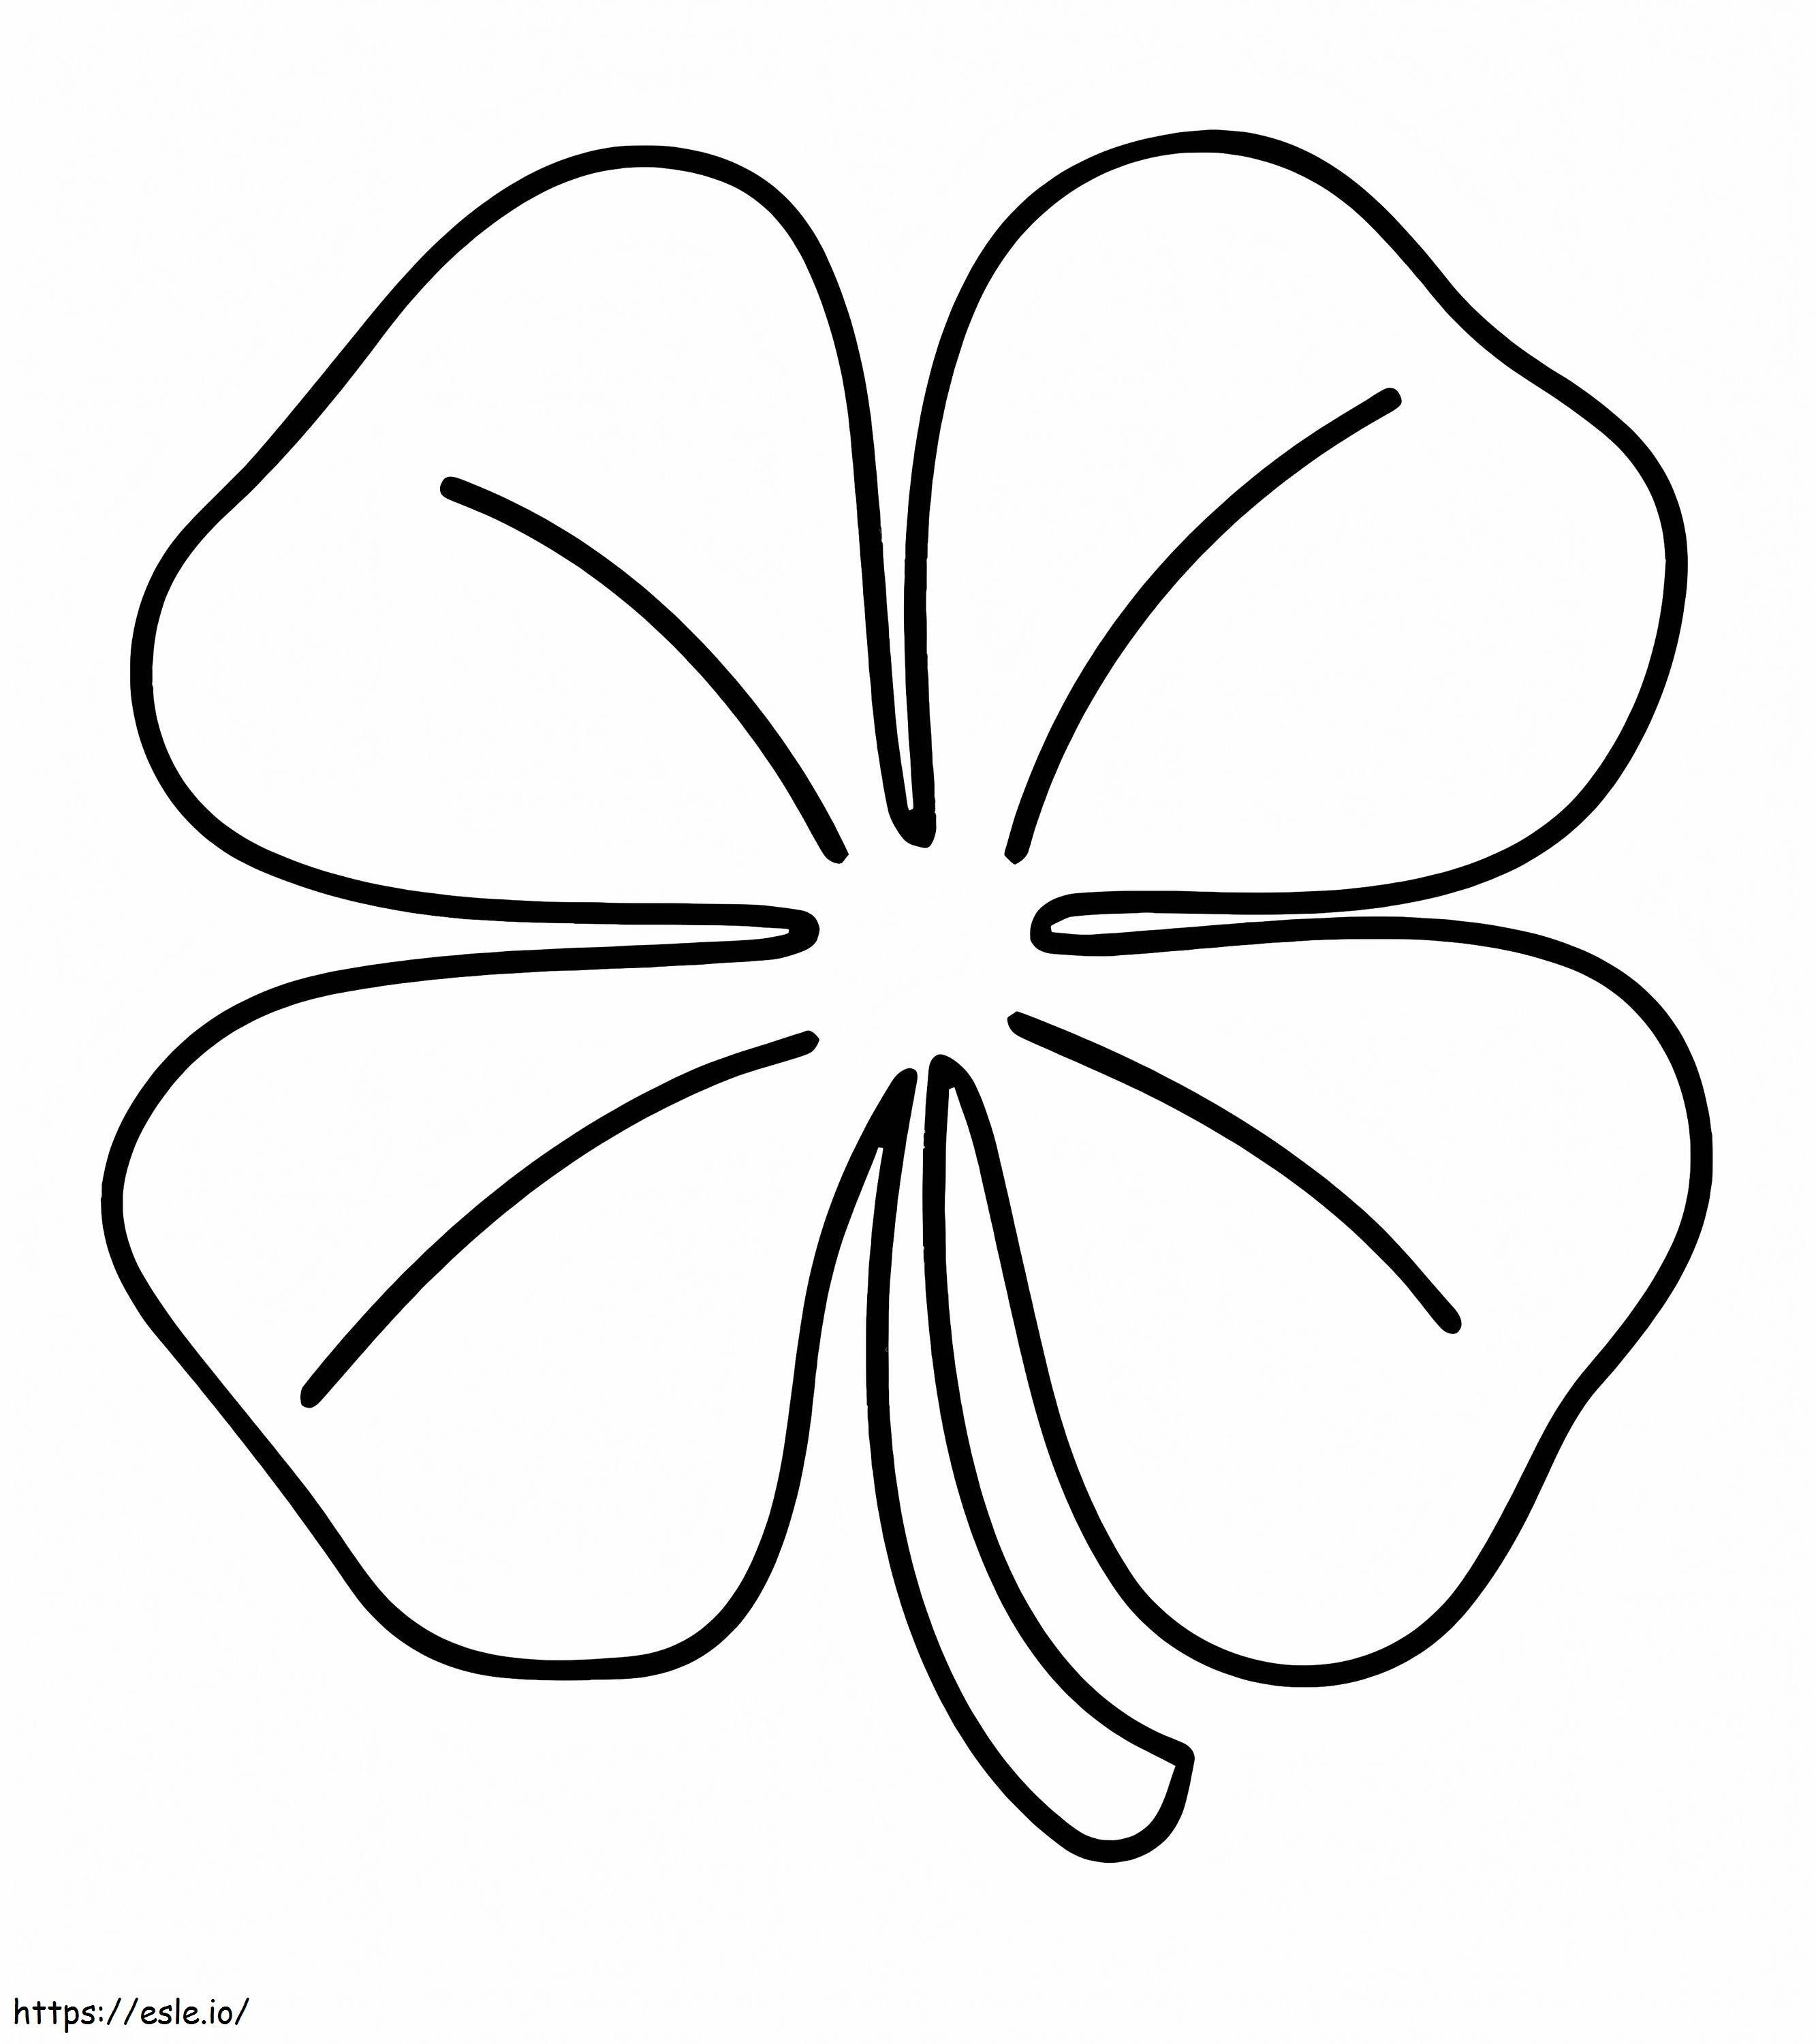 Normal Clover coloring page